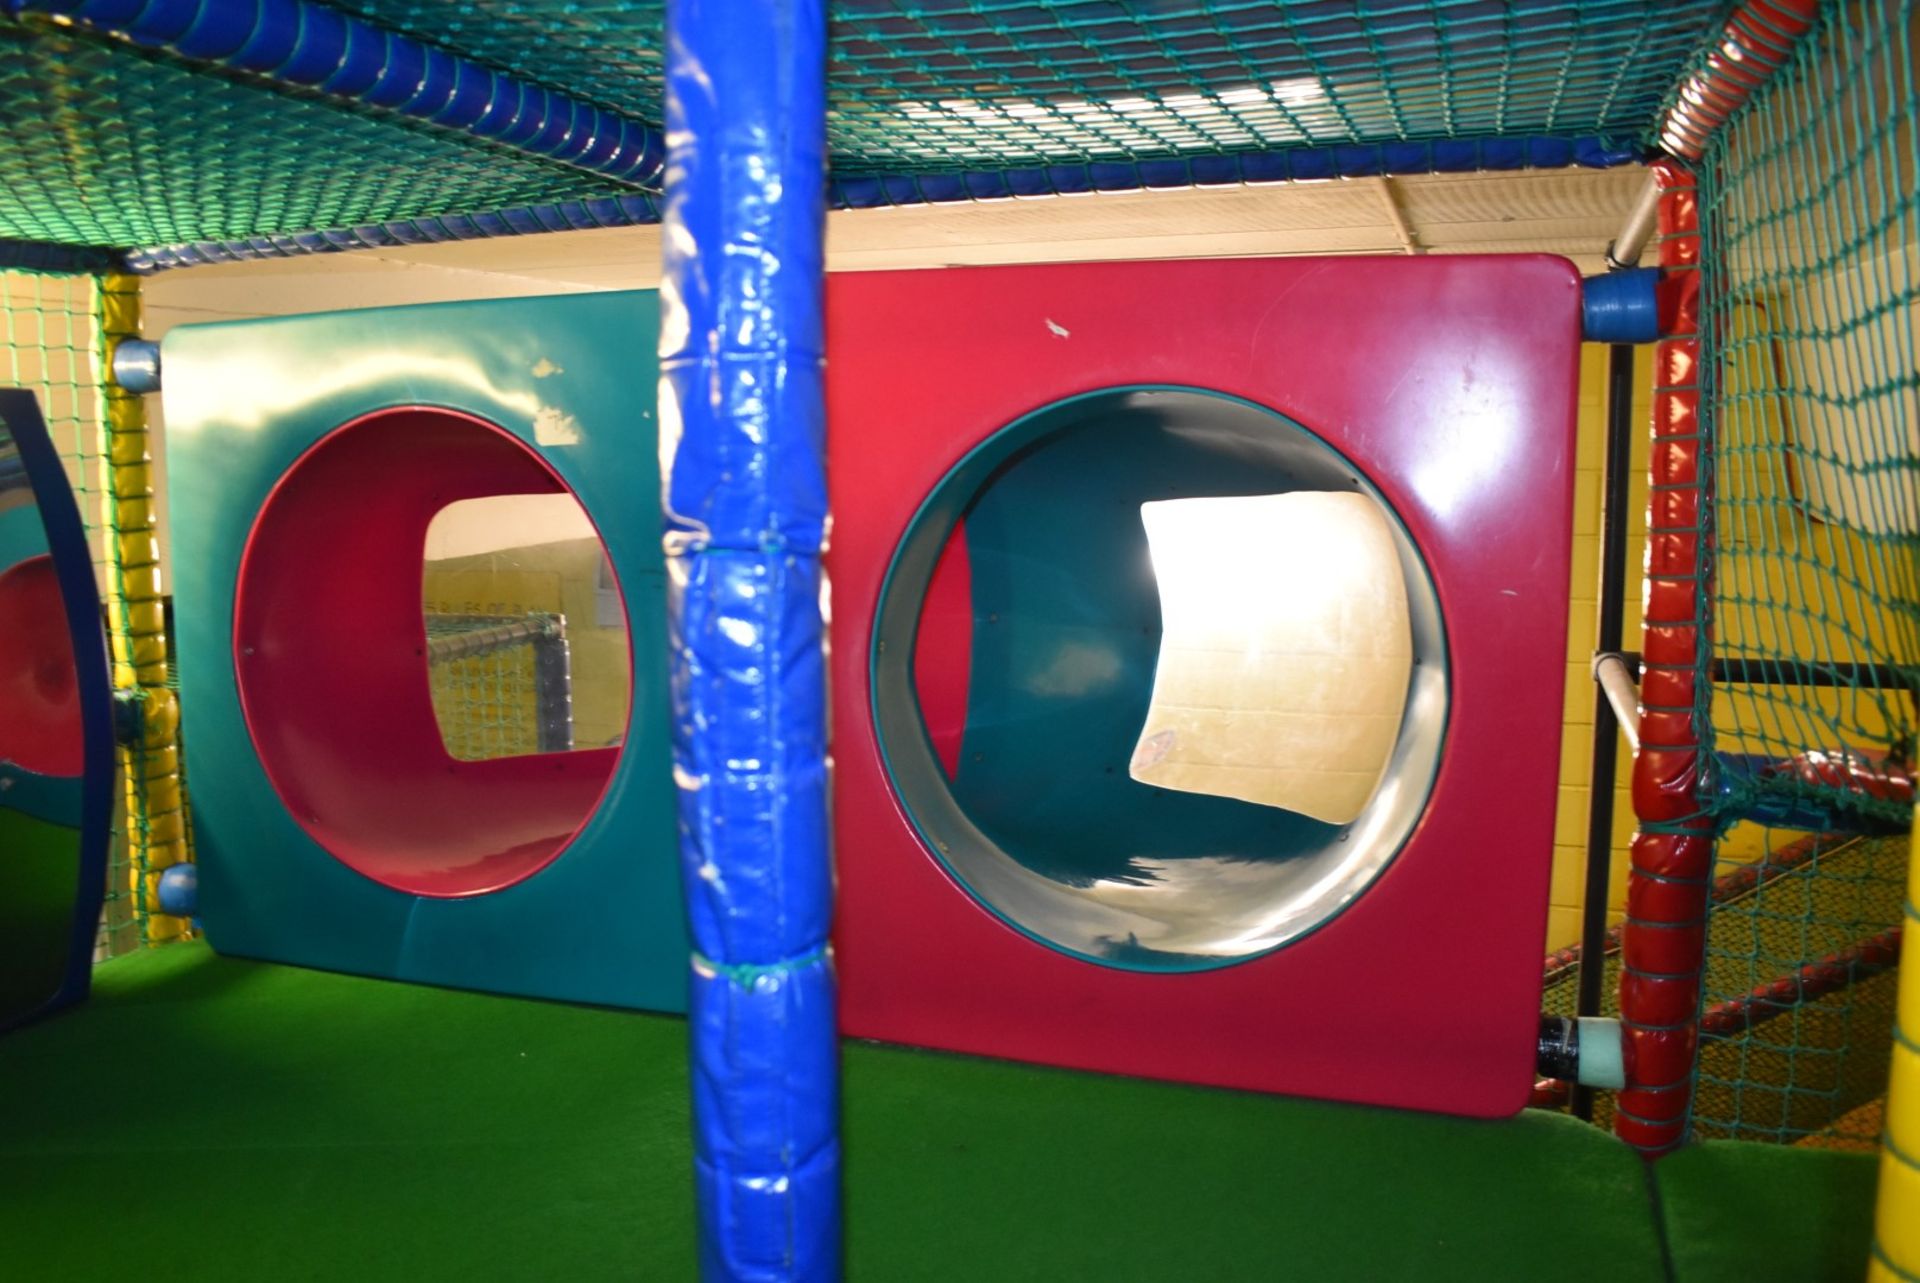 Bramleys Big Adventure Playground - Giant Action-Packed Playcentre With Slides, Zip Line Swings, - Image 66 of 128